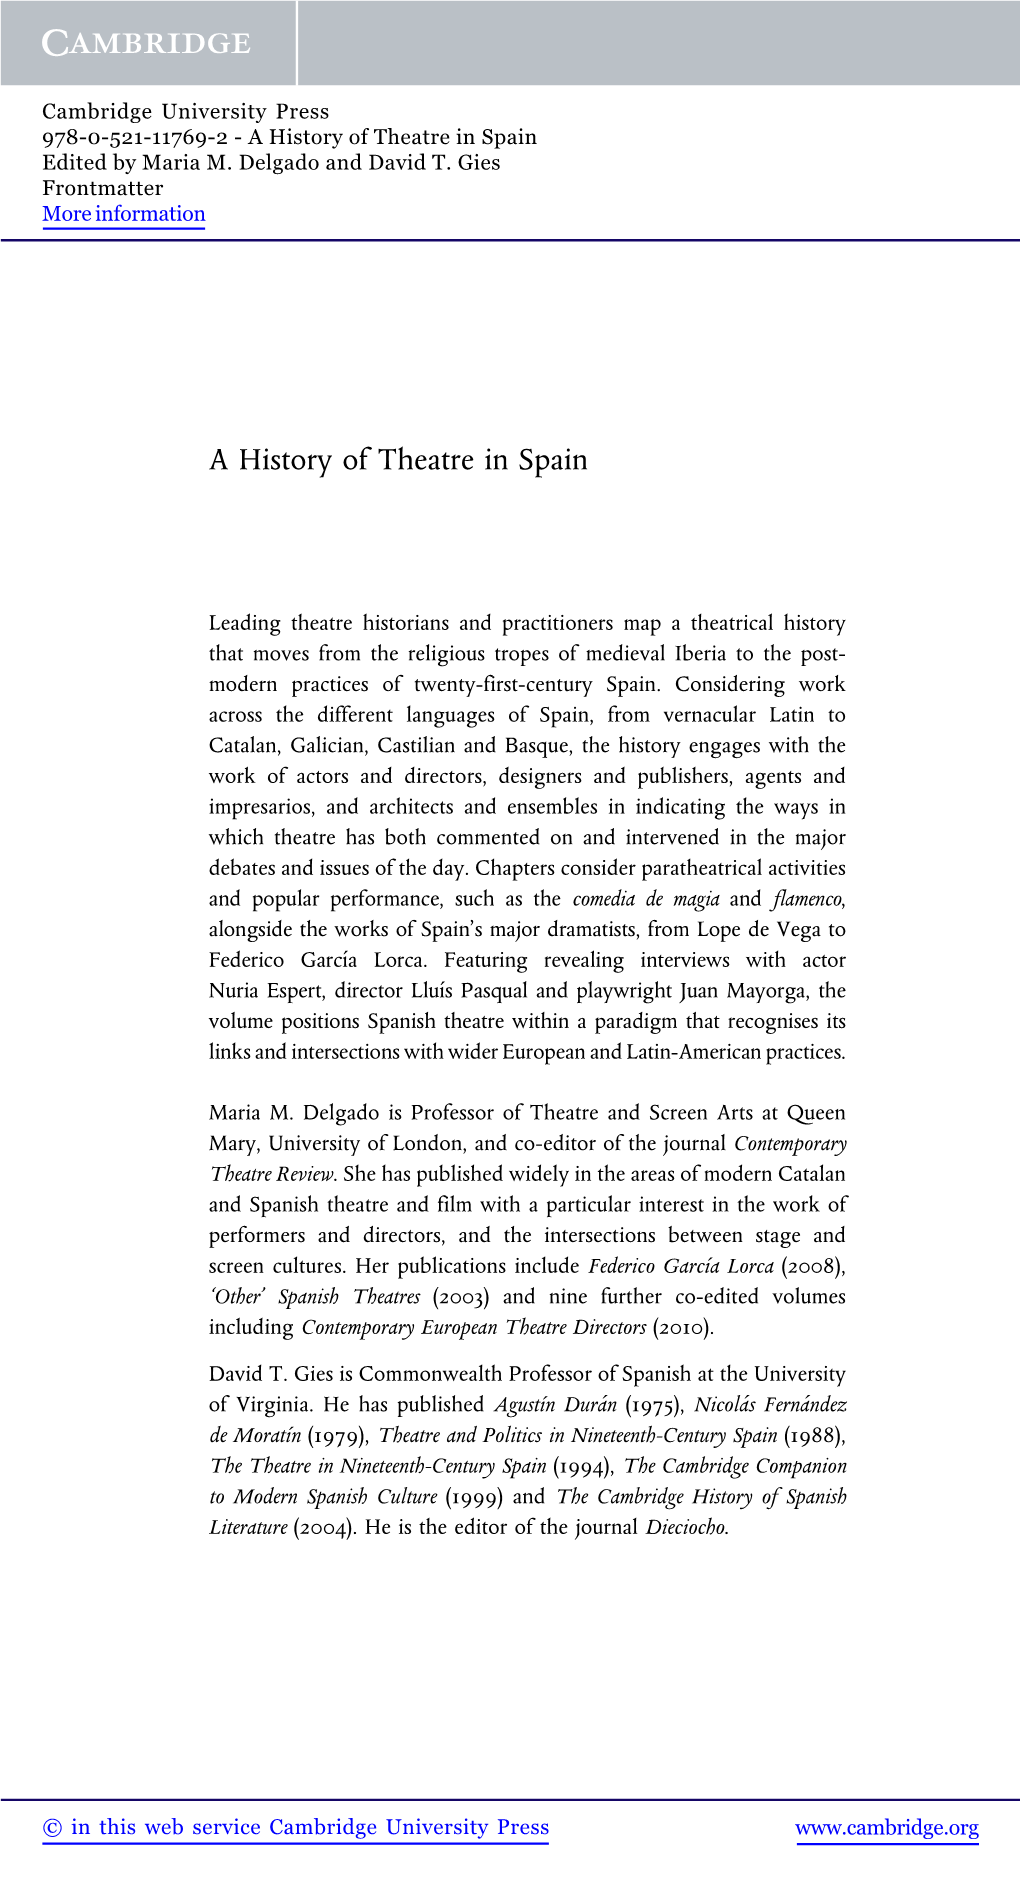 A History of Theatre in Spain Edited by Maria M